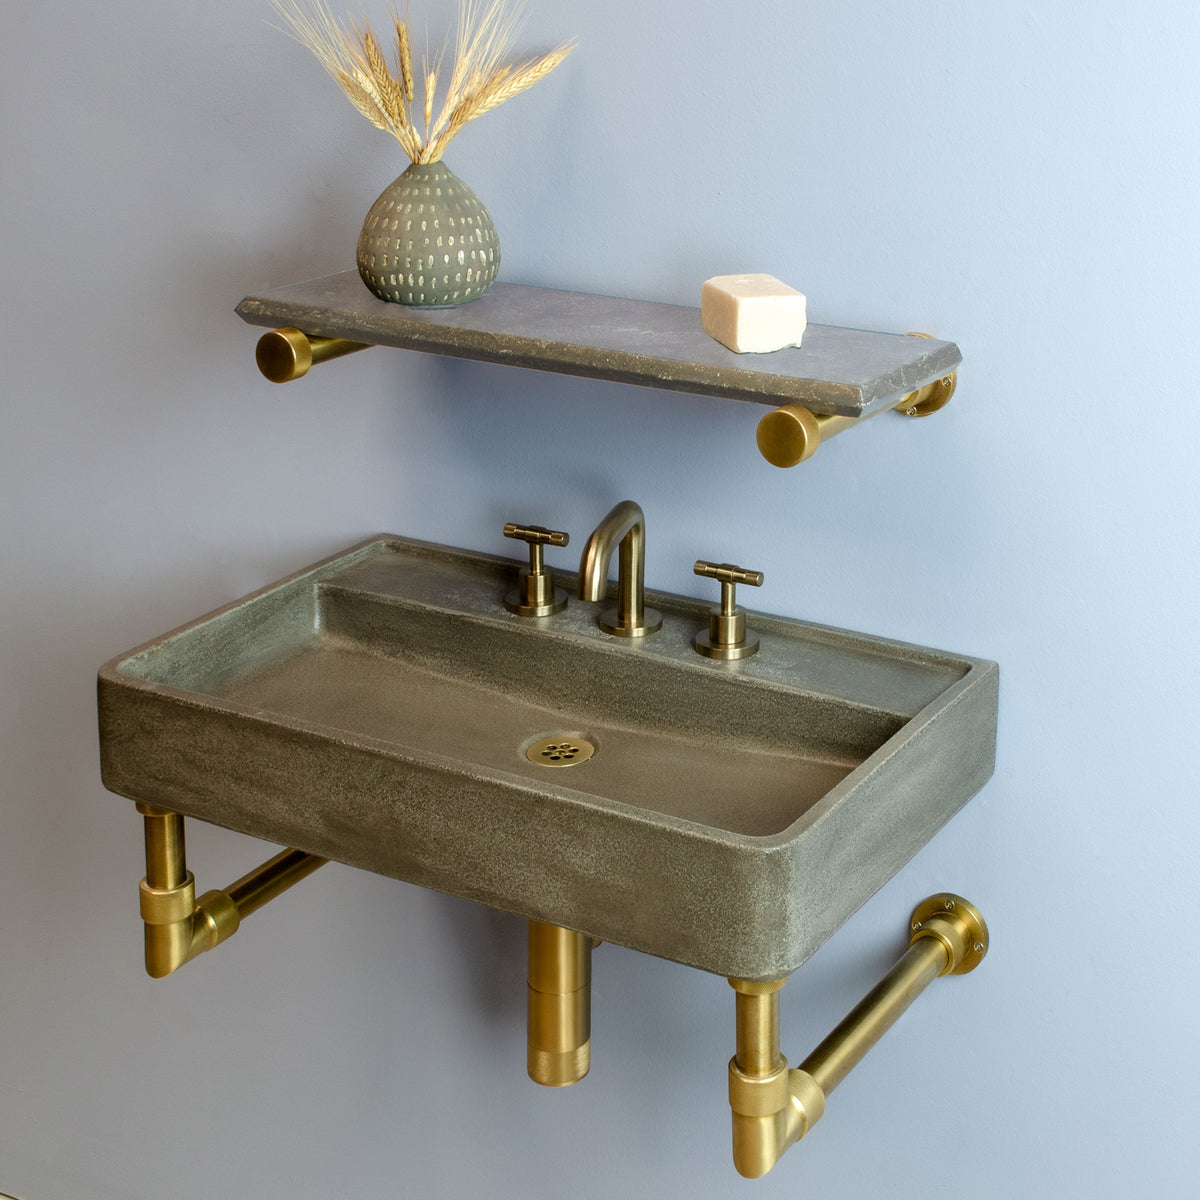 Lumbre Bath Sink in concrete on Elemental Classic wall unit in aged brass image 1 of 4